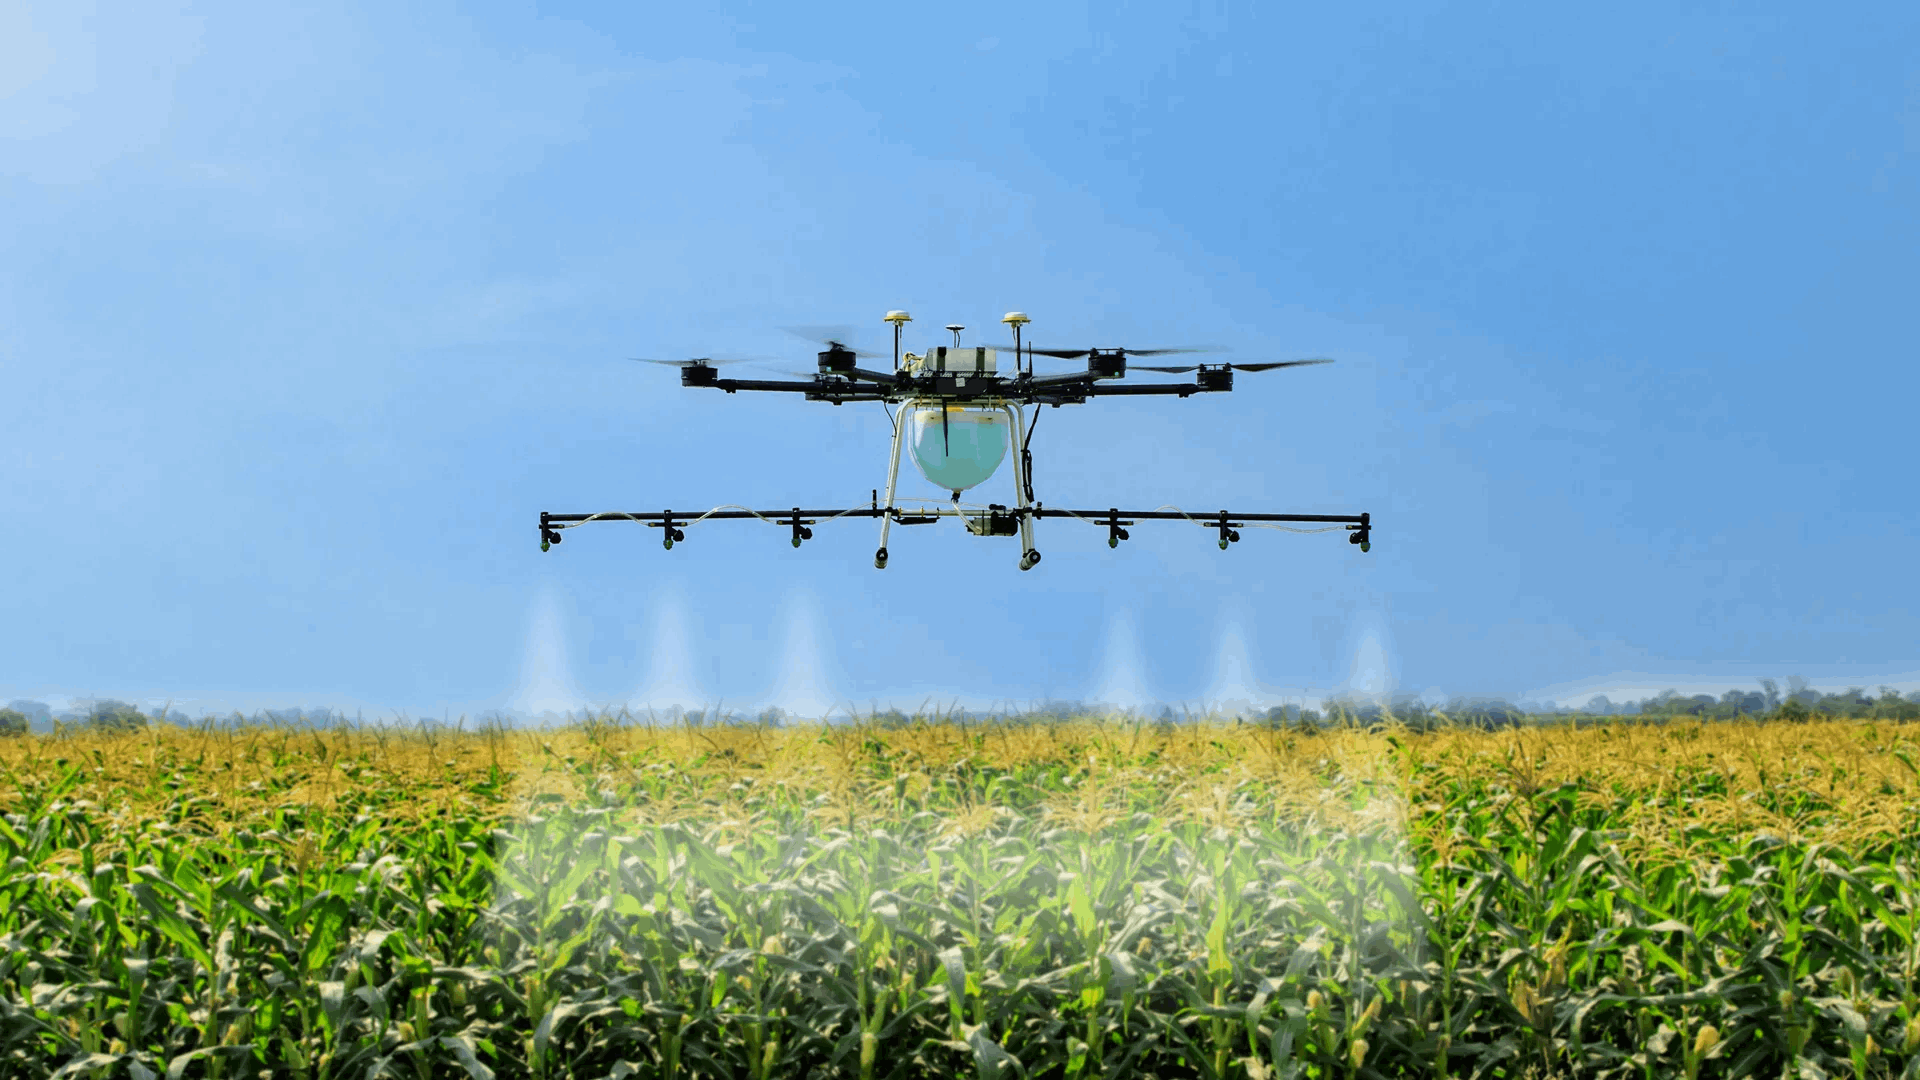 AgriTech - Learn More About This Technology